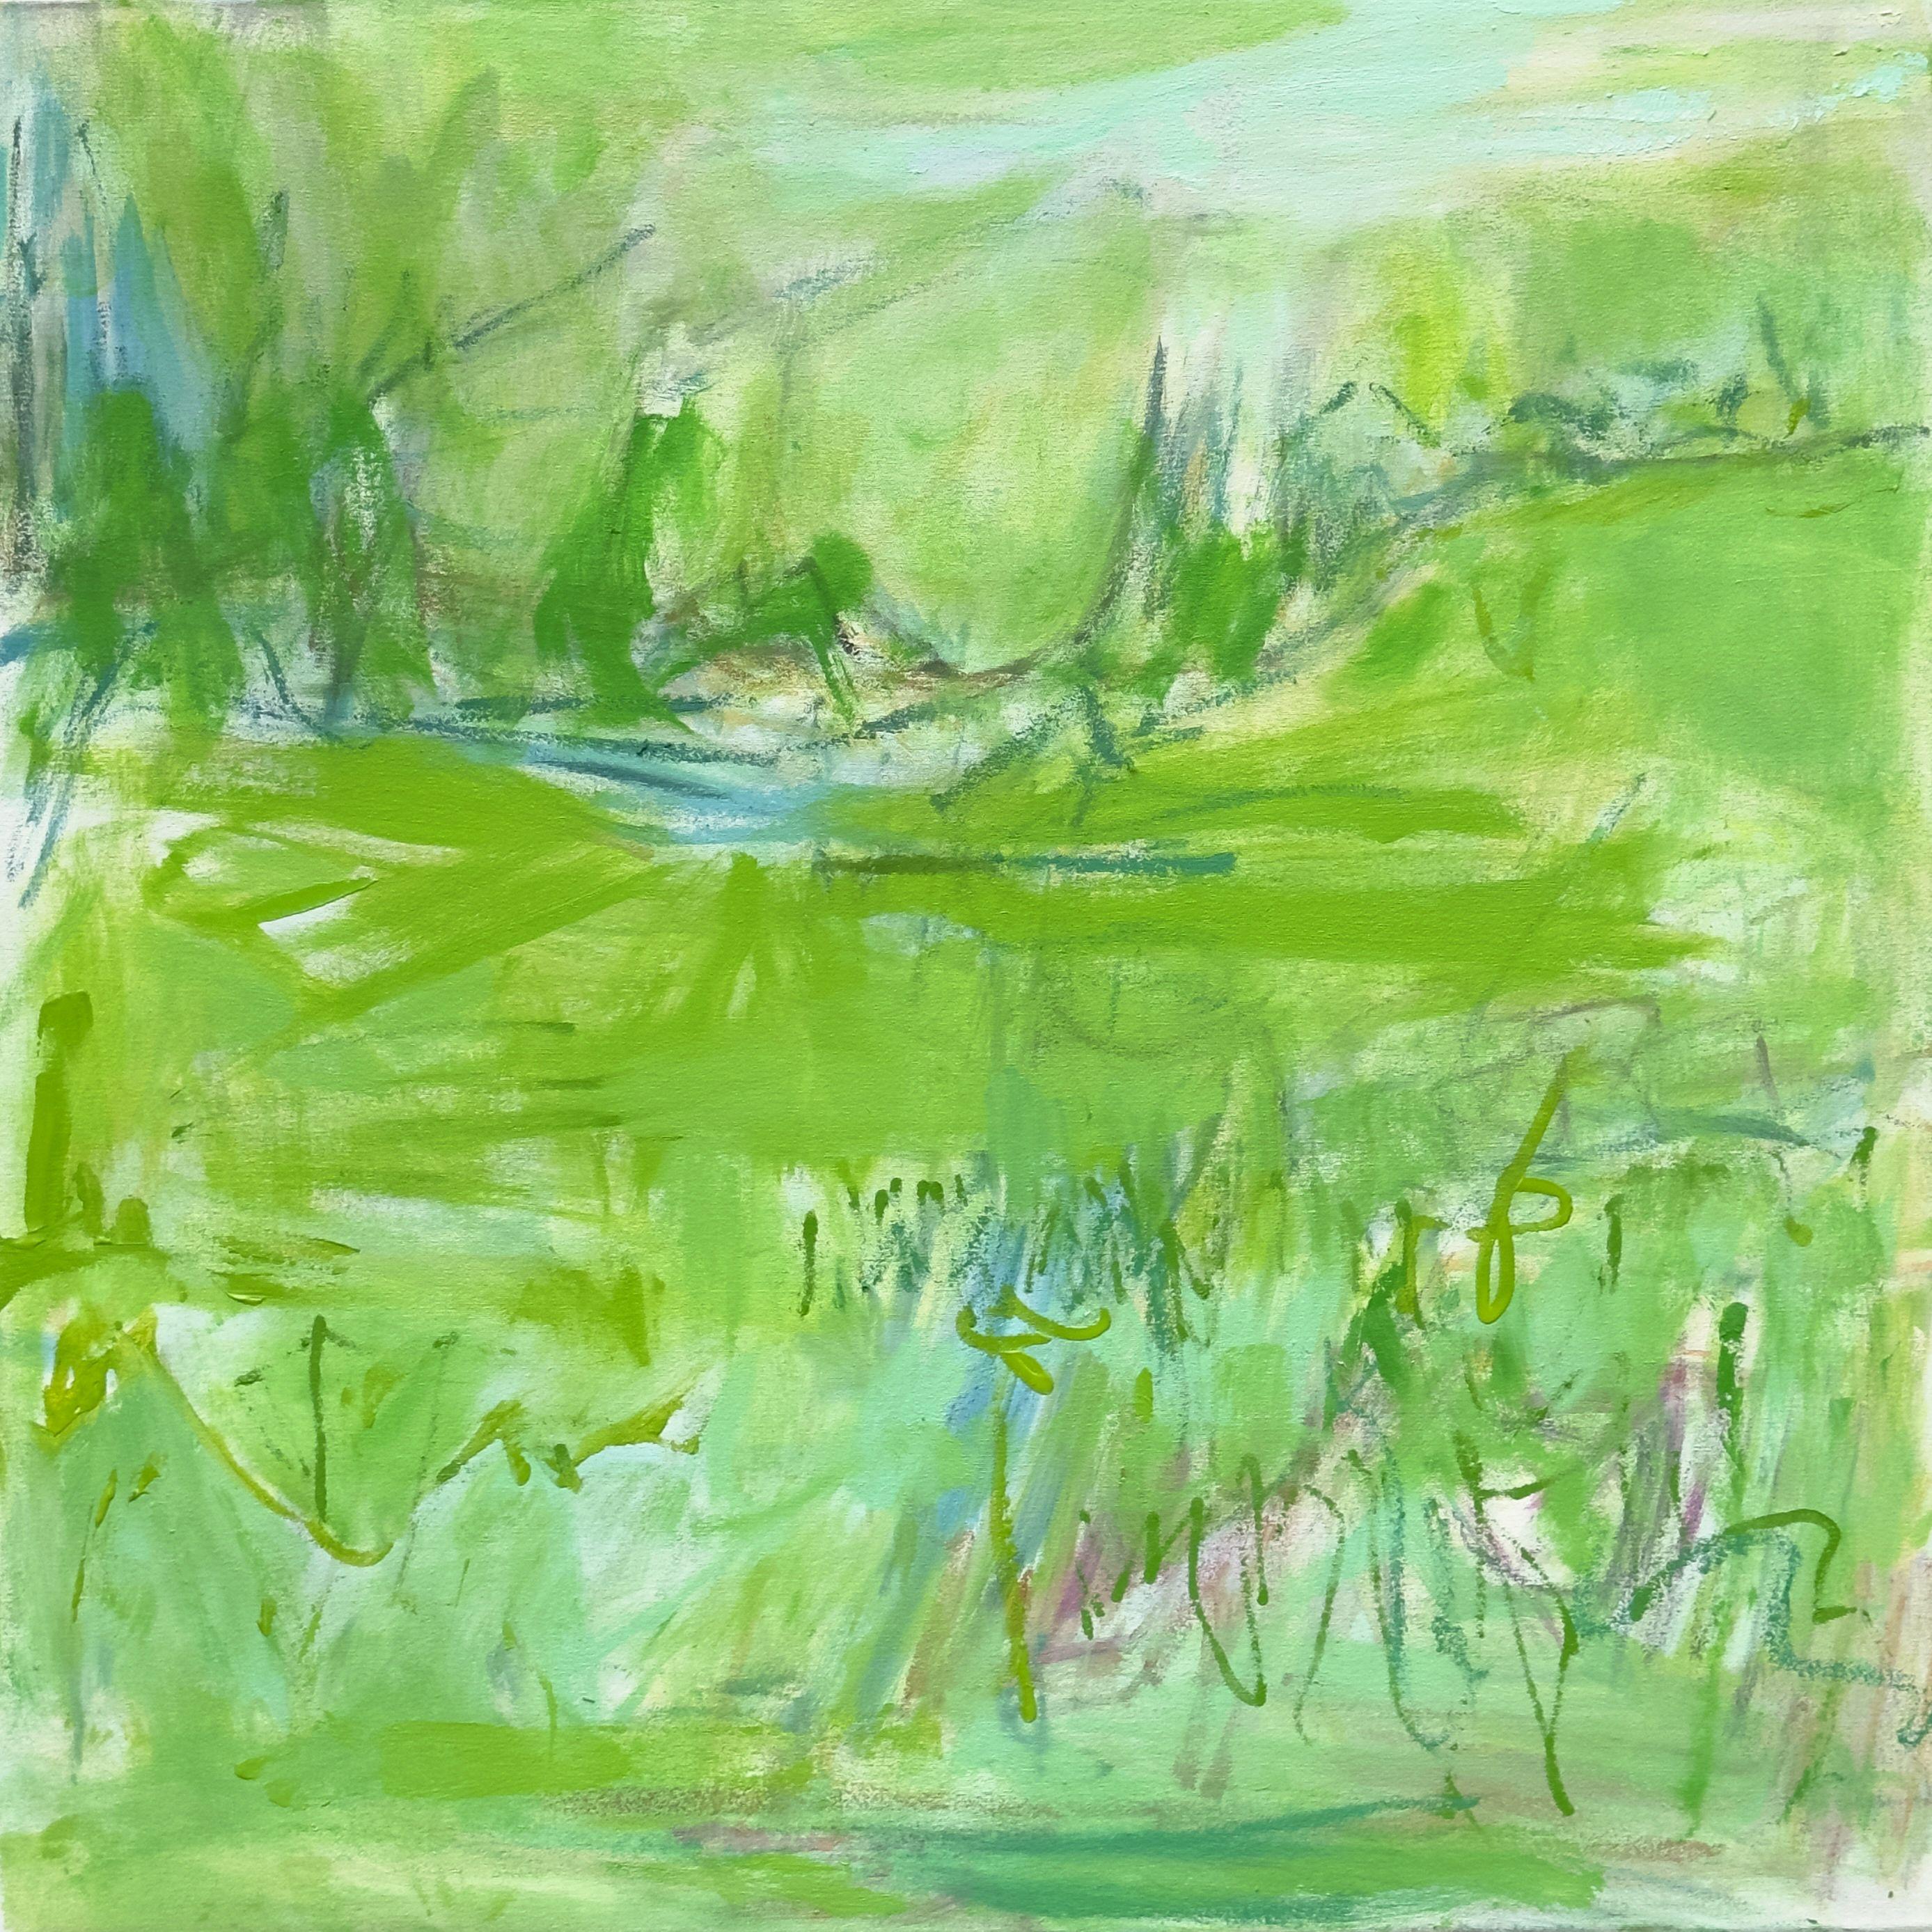 "Nashville Green" is a abstract expressionist oil painting on canvas by Trixie Pitts. It is a vibrant abstract inspired by Nashville and how green it is. The palette has a wide range of different greens, robin's egg turquoise, teal and a hint of